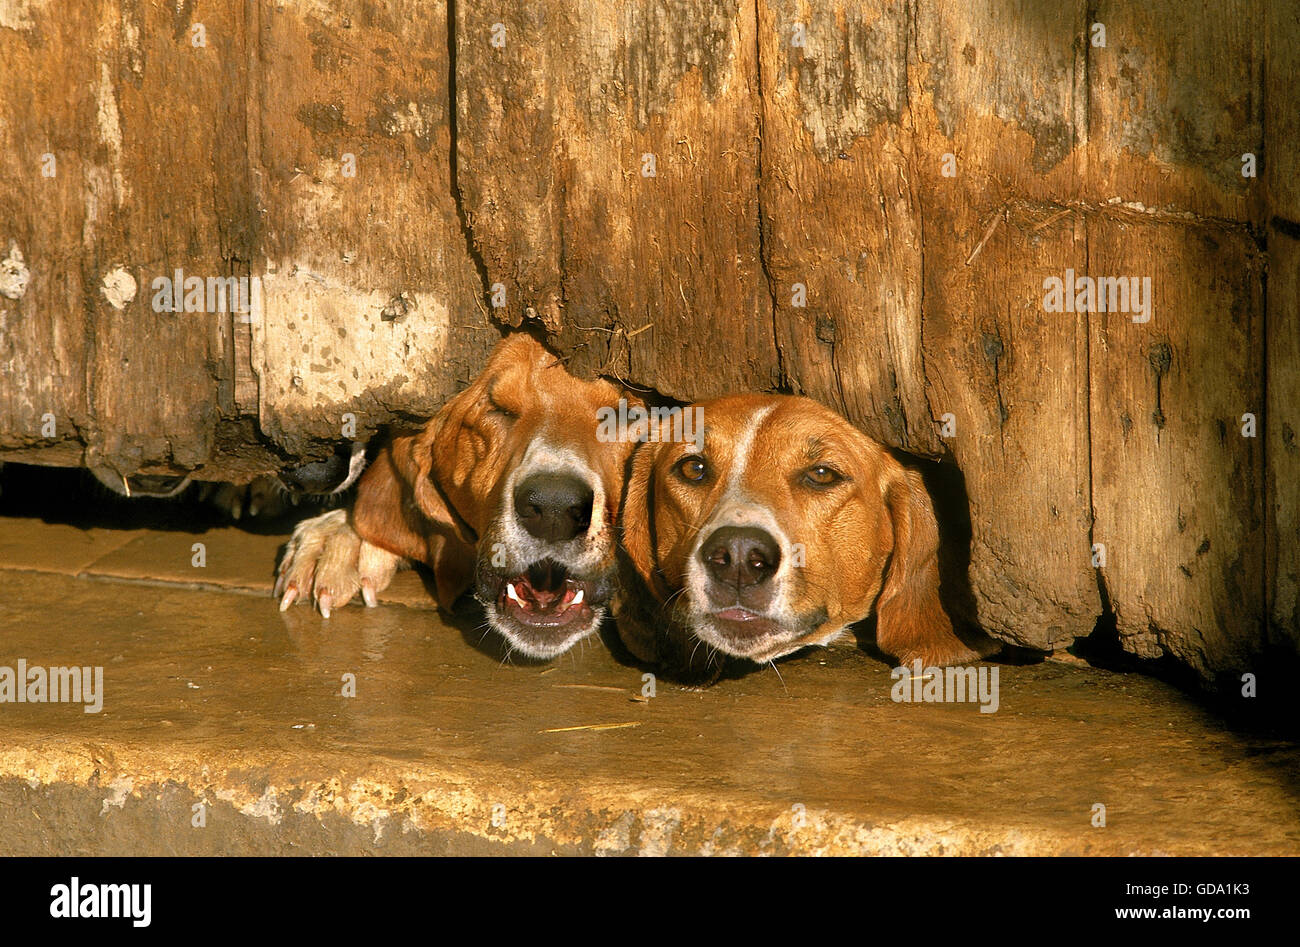 GREAT ANGLO-FRENCH WHITE AND ORANGE HOUND, DOGS BARKING, GARDING HOUSE Stock Photo